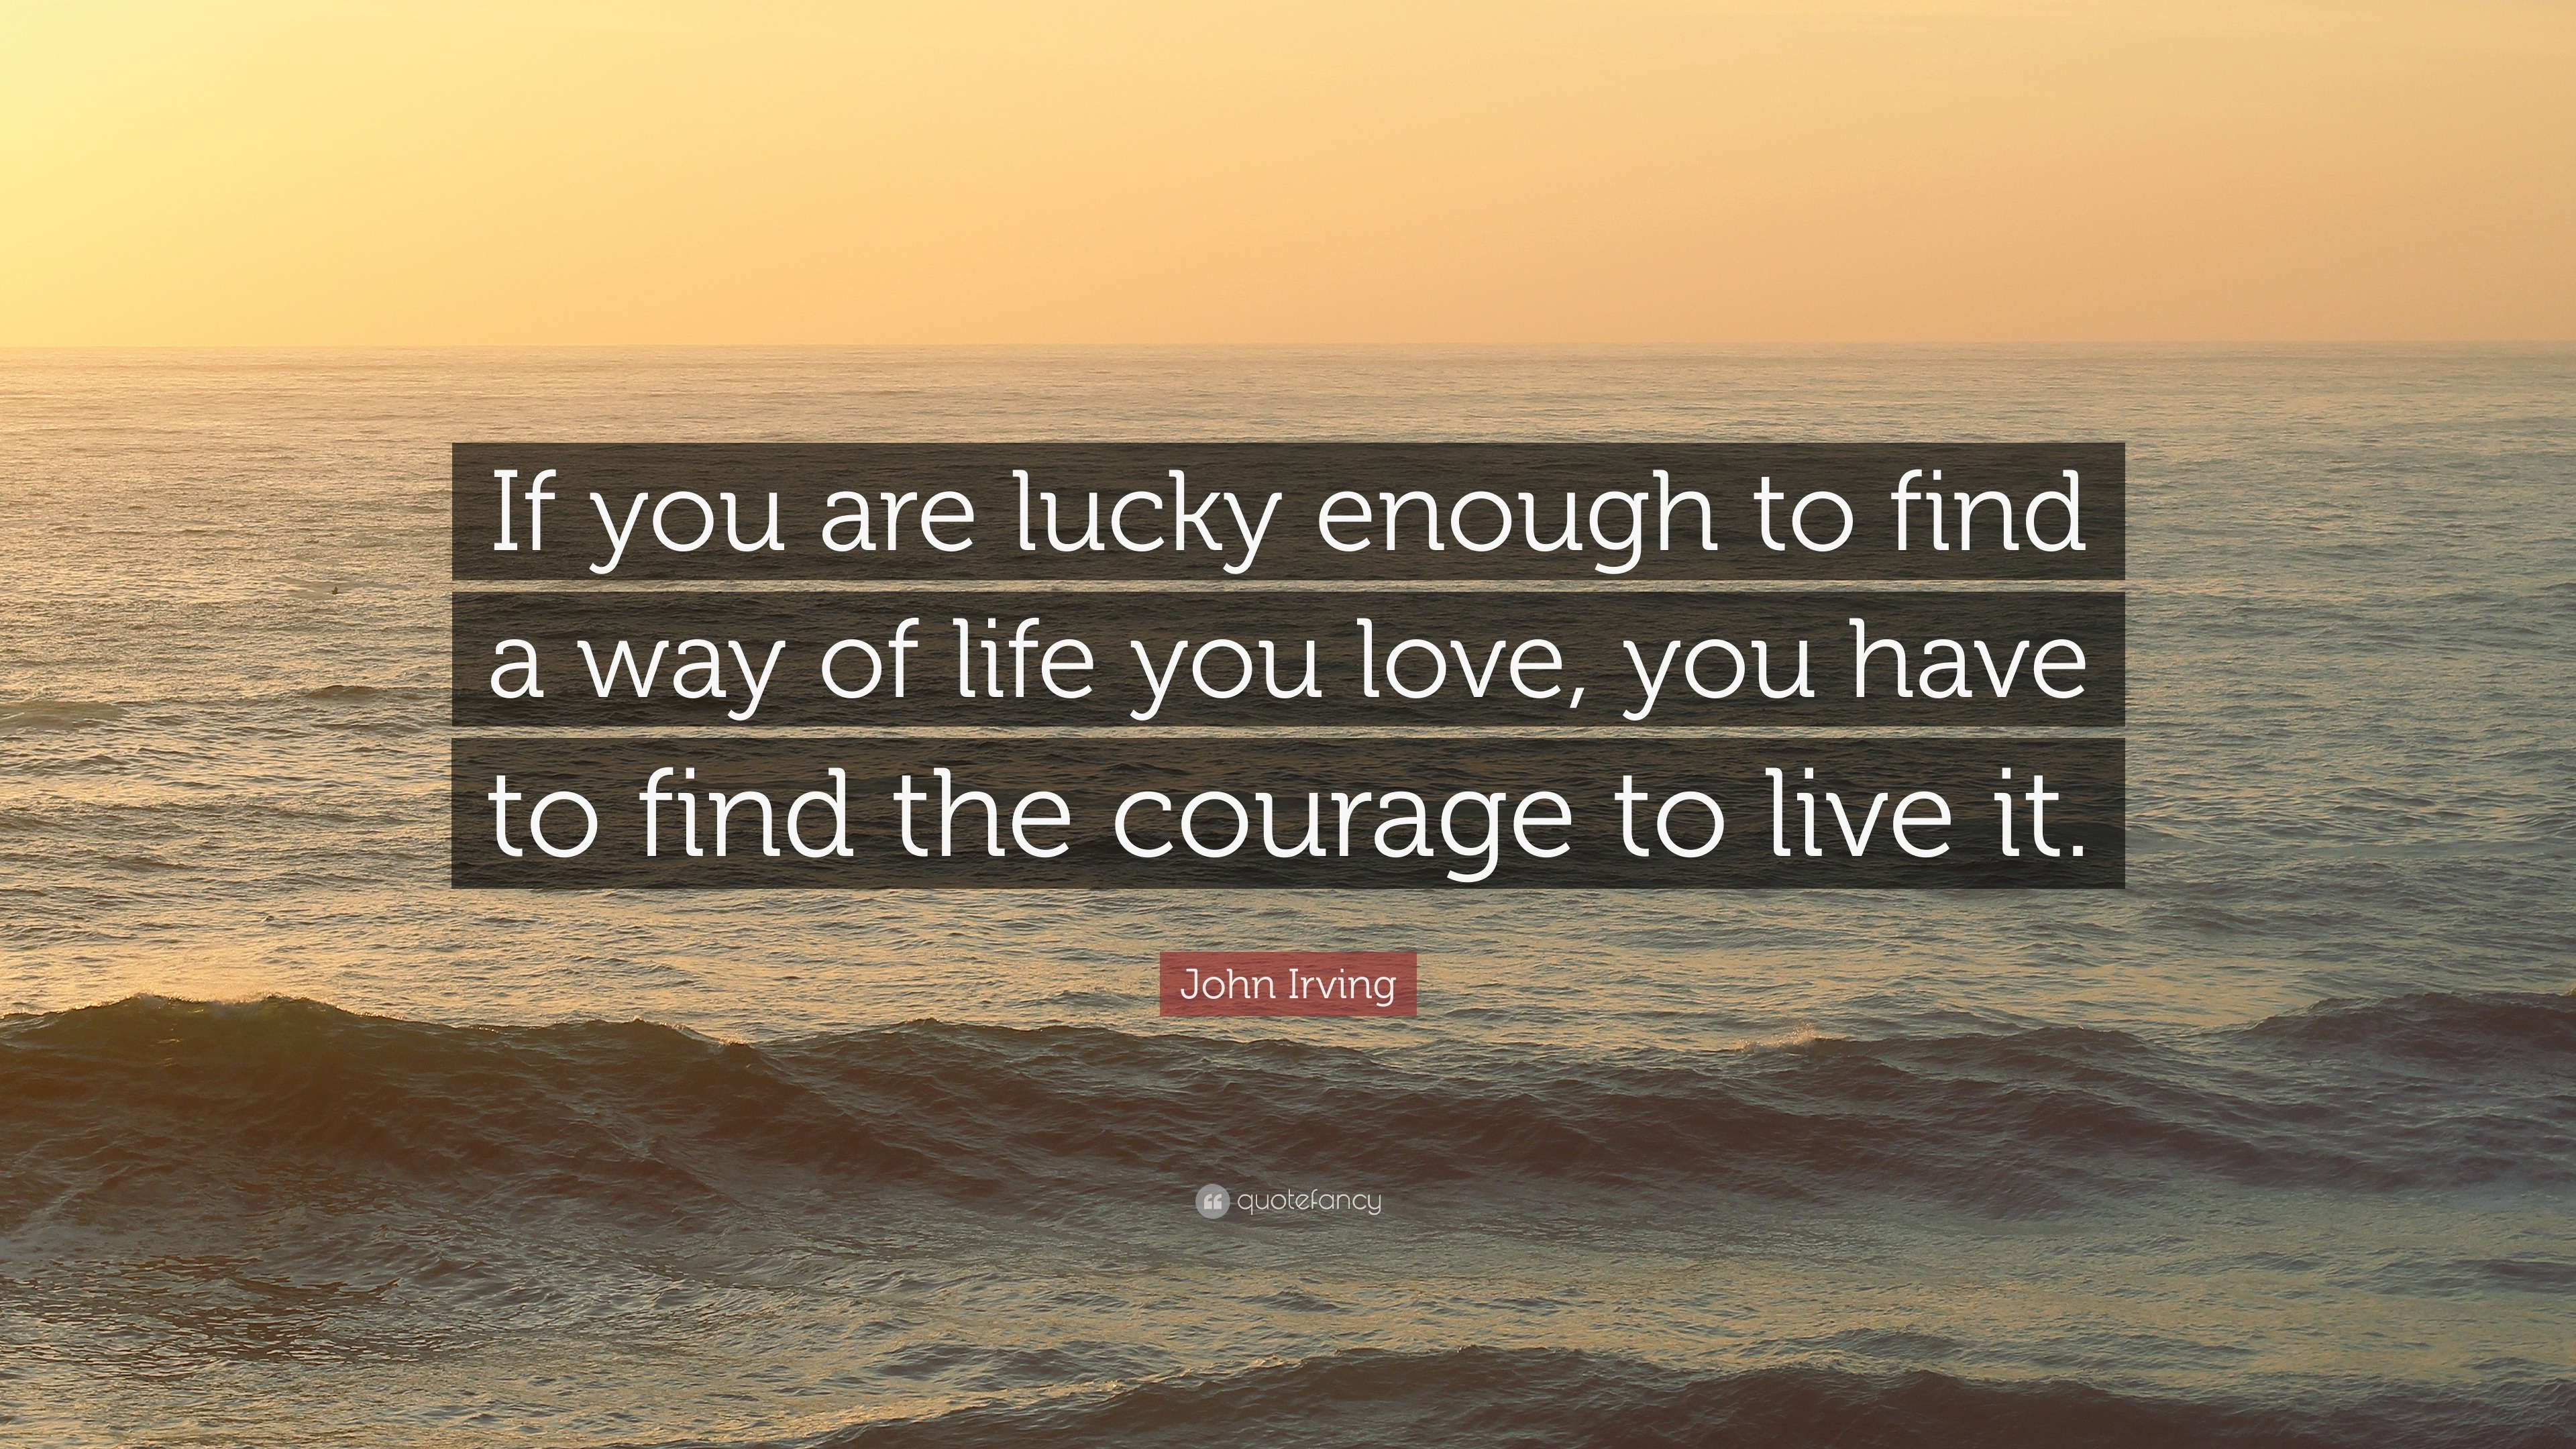 John Irving Quote “If you are lucky enough to find a way of life